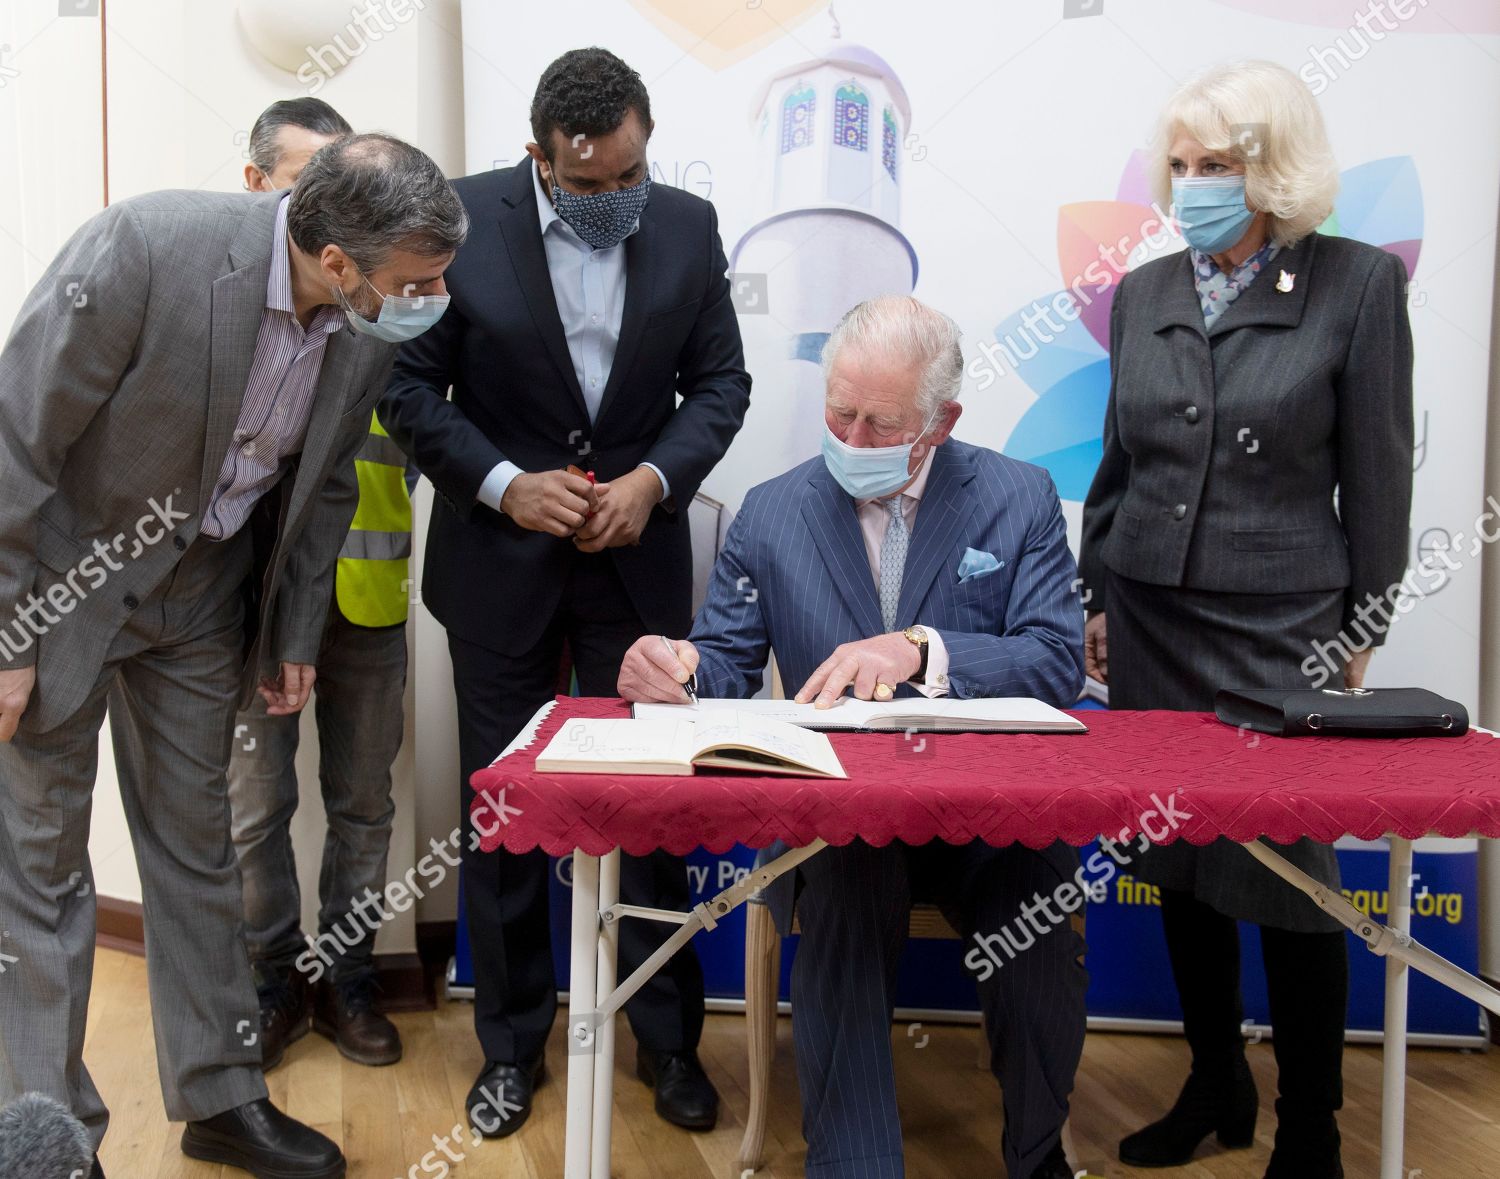 prince-charles-and-camilla-duchess-of-cornwall-visit-vaccination-pop-up-centre-at-finsbury-park-mosque-london-uk-shutterstock-editorial-11802378k.jpg